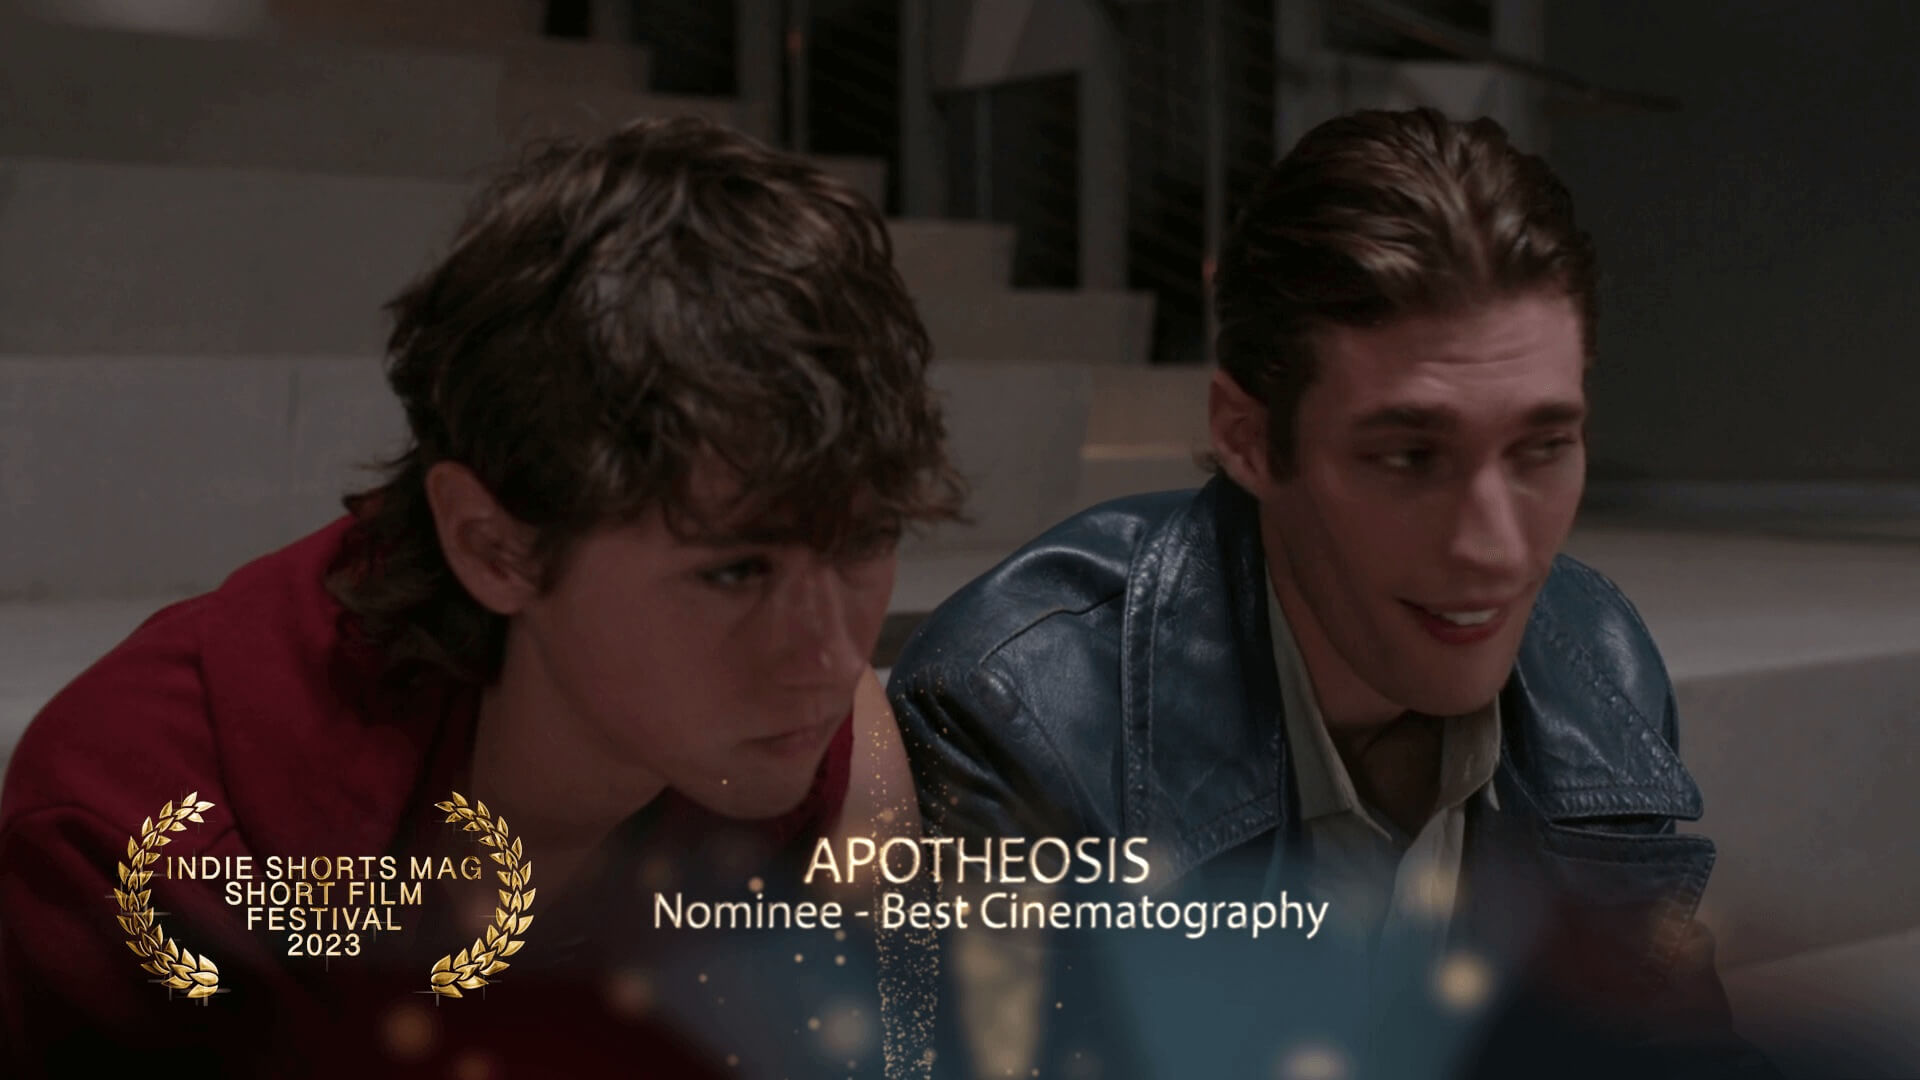 Indie Shorts Mag Short Film Festival - Best Cinematography - Nominee - Apothesosis